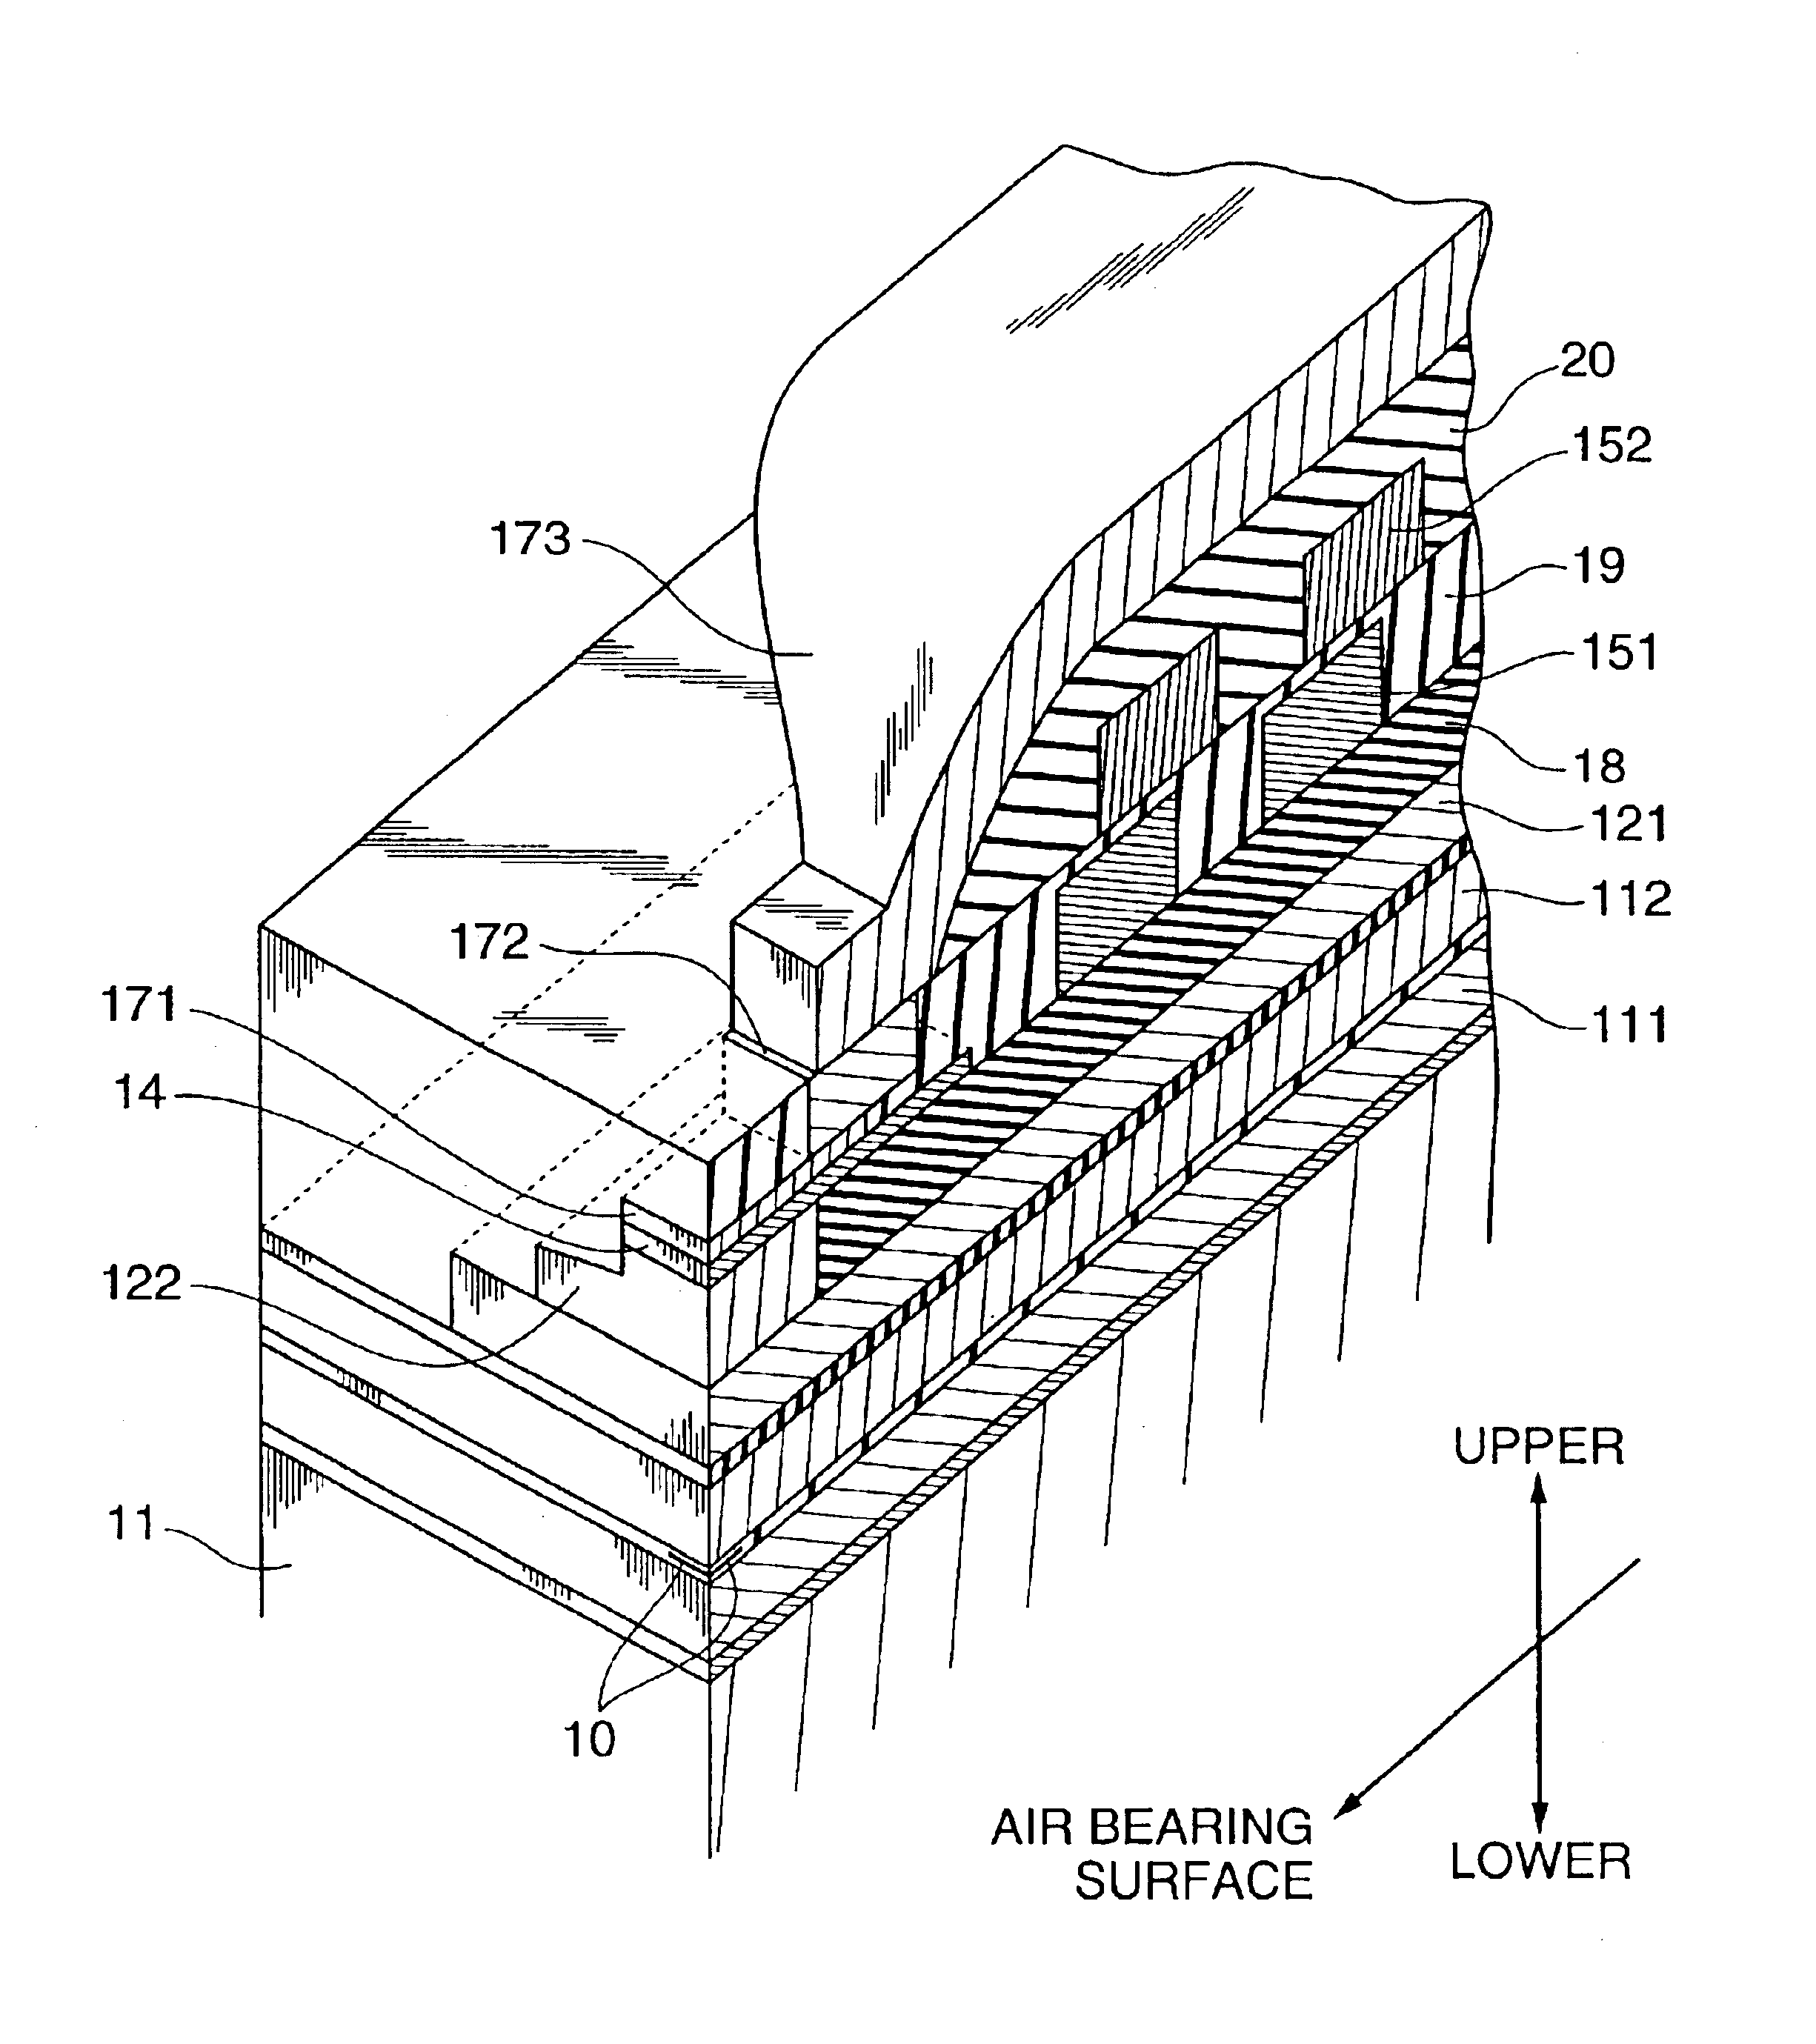 Thin film magnetic head having multiple layered films determining track width imbedded in an insulating film and method of manufacturing the same